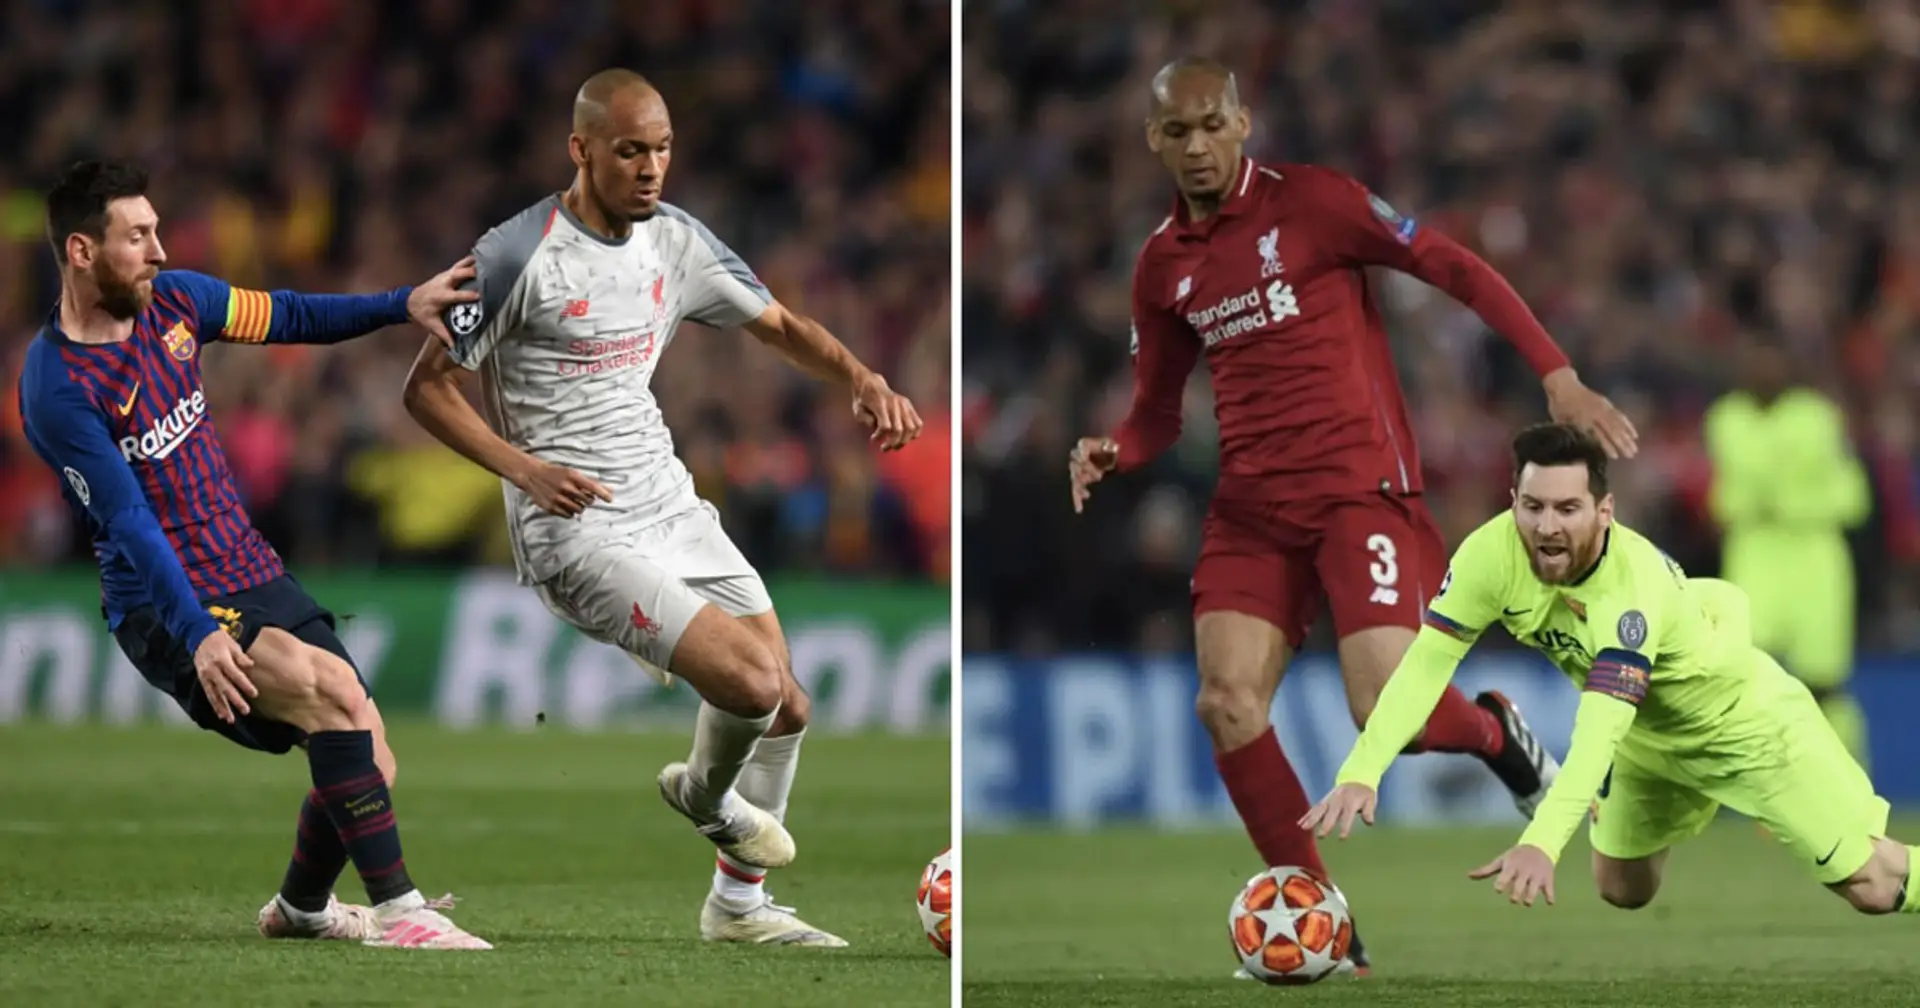 'His foot tripped me from behind and that was it': How Fabinho took revenge on 'unstoppable' Messi at Anfield